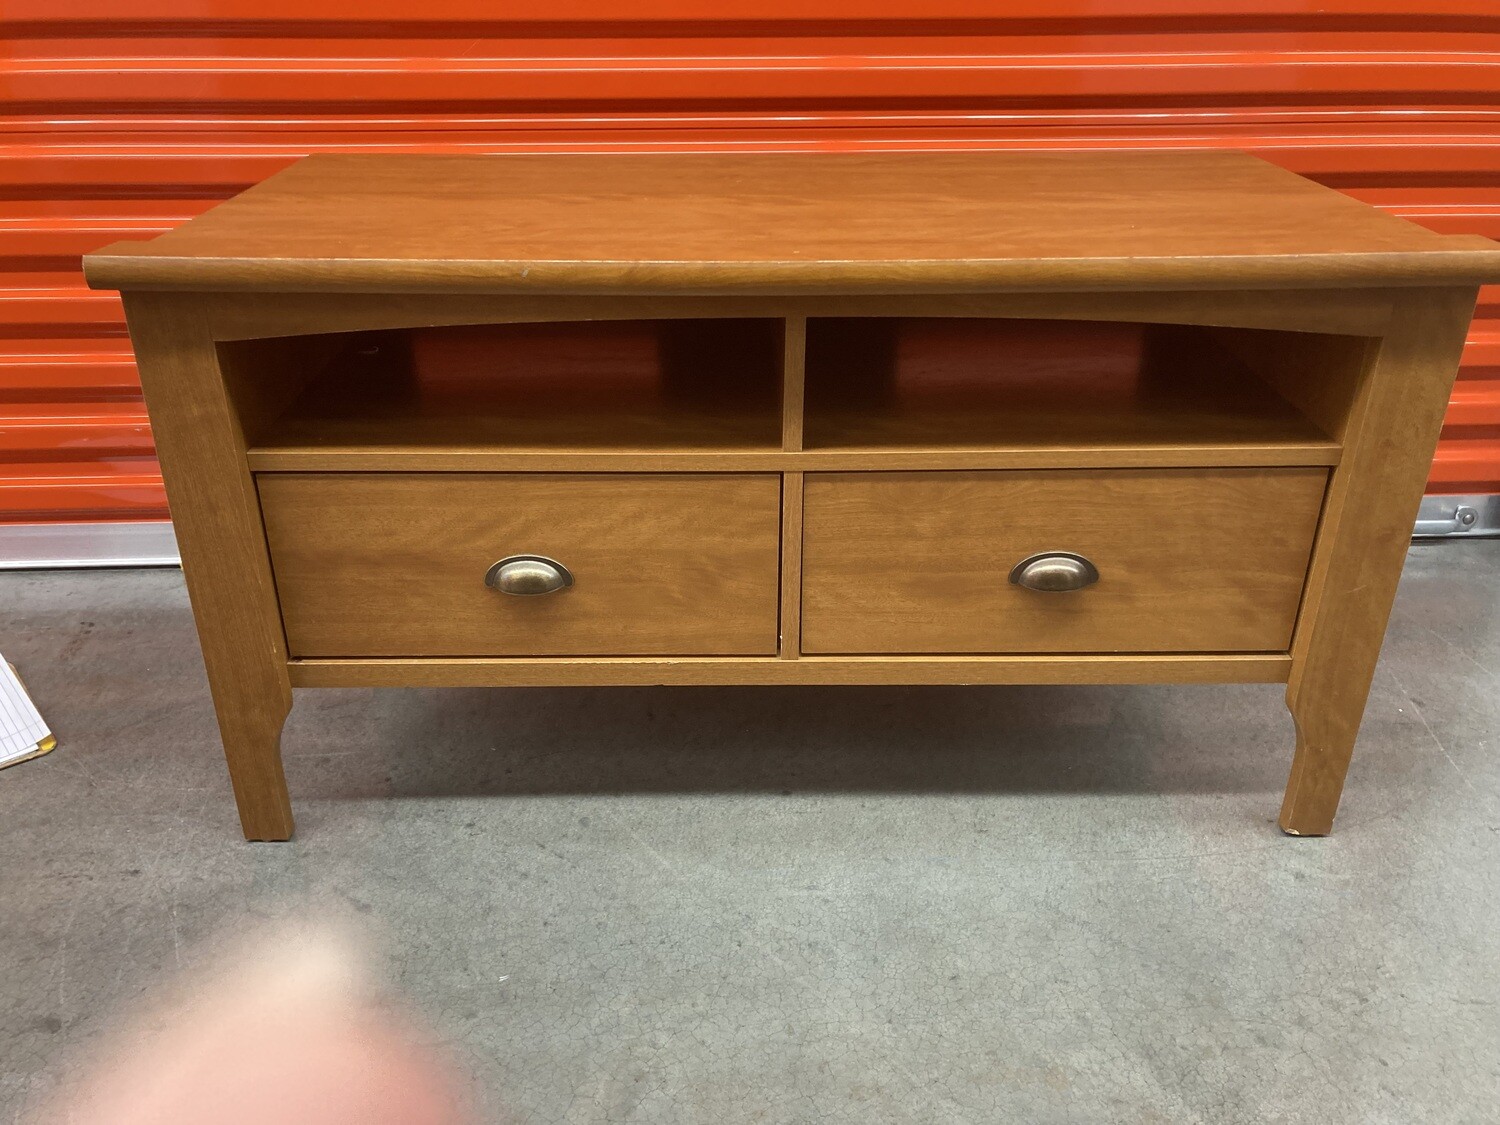 TV Stand, Wood finish, brushed nickel knobs #2133